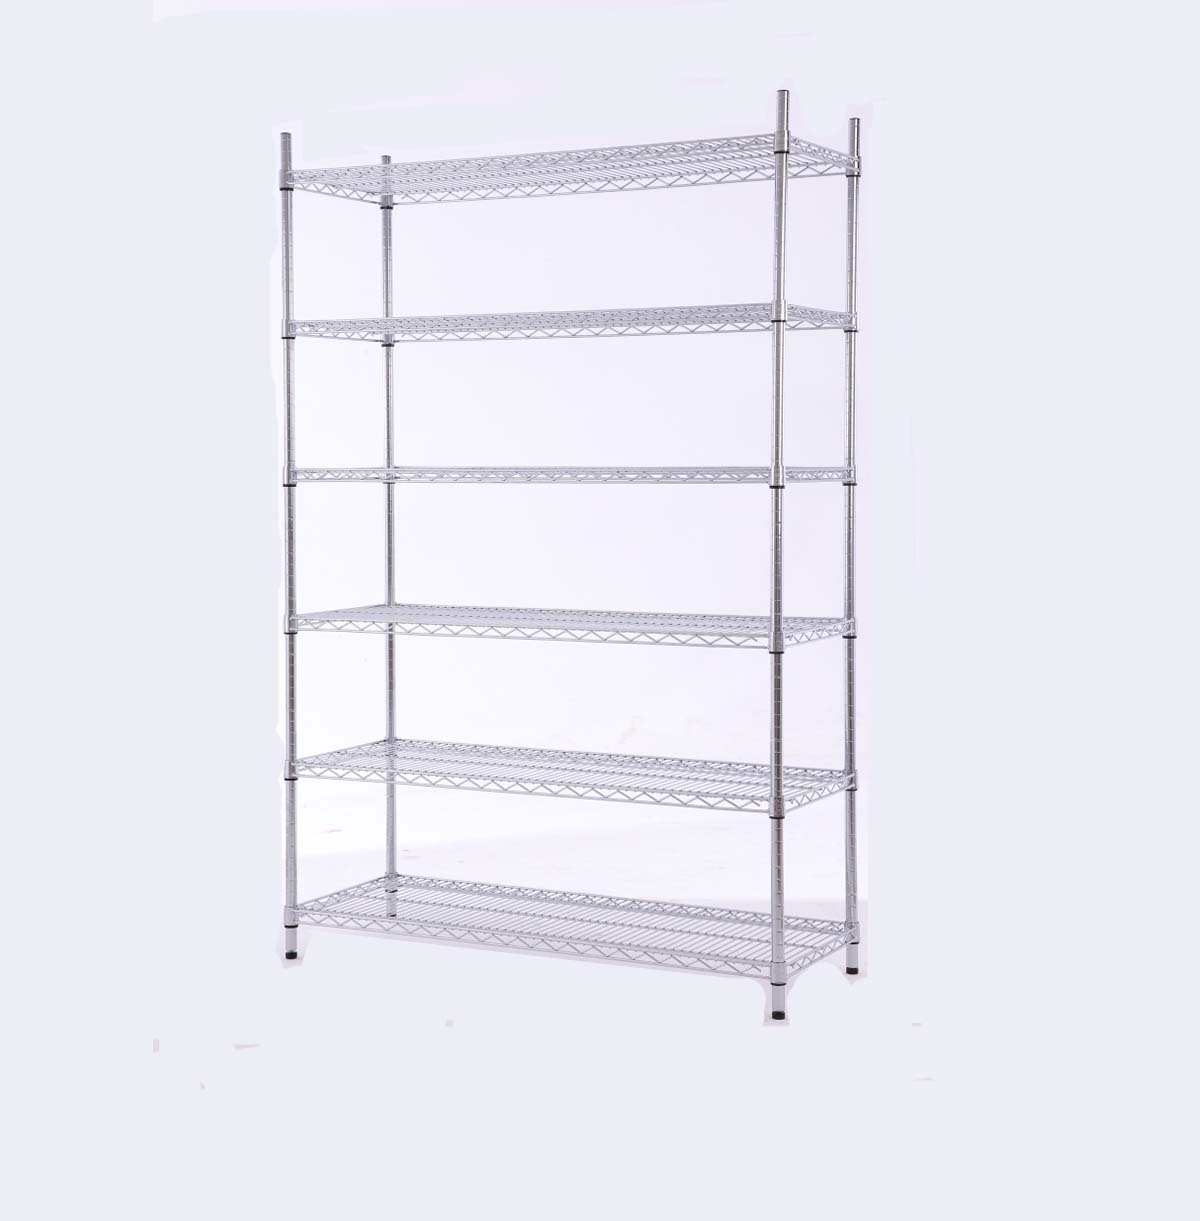 Shelf system inventory.wire shelving unit 12 inch deep